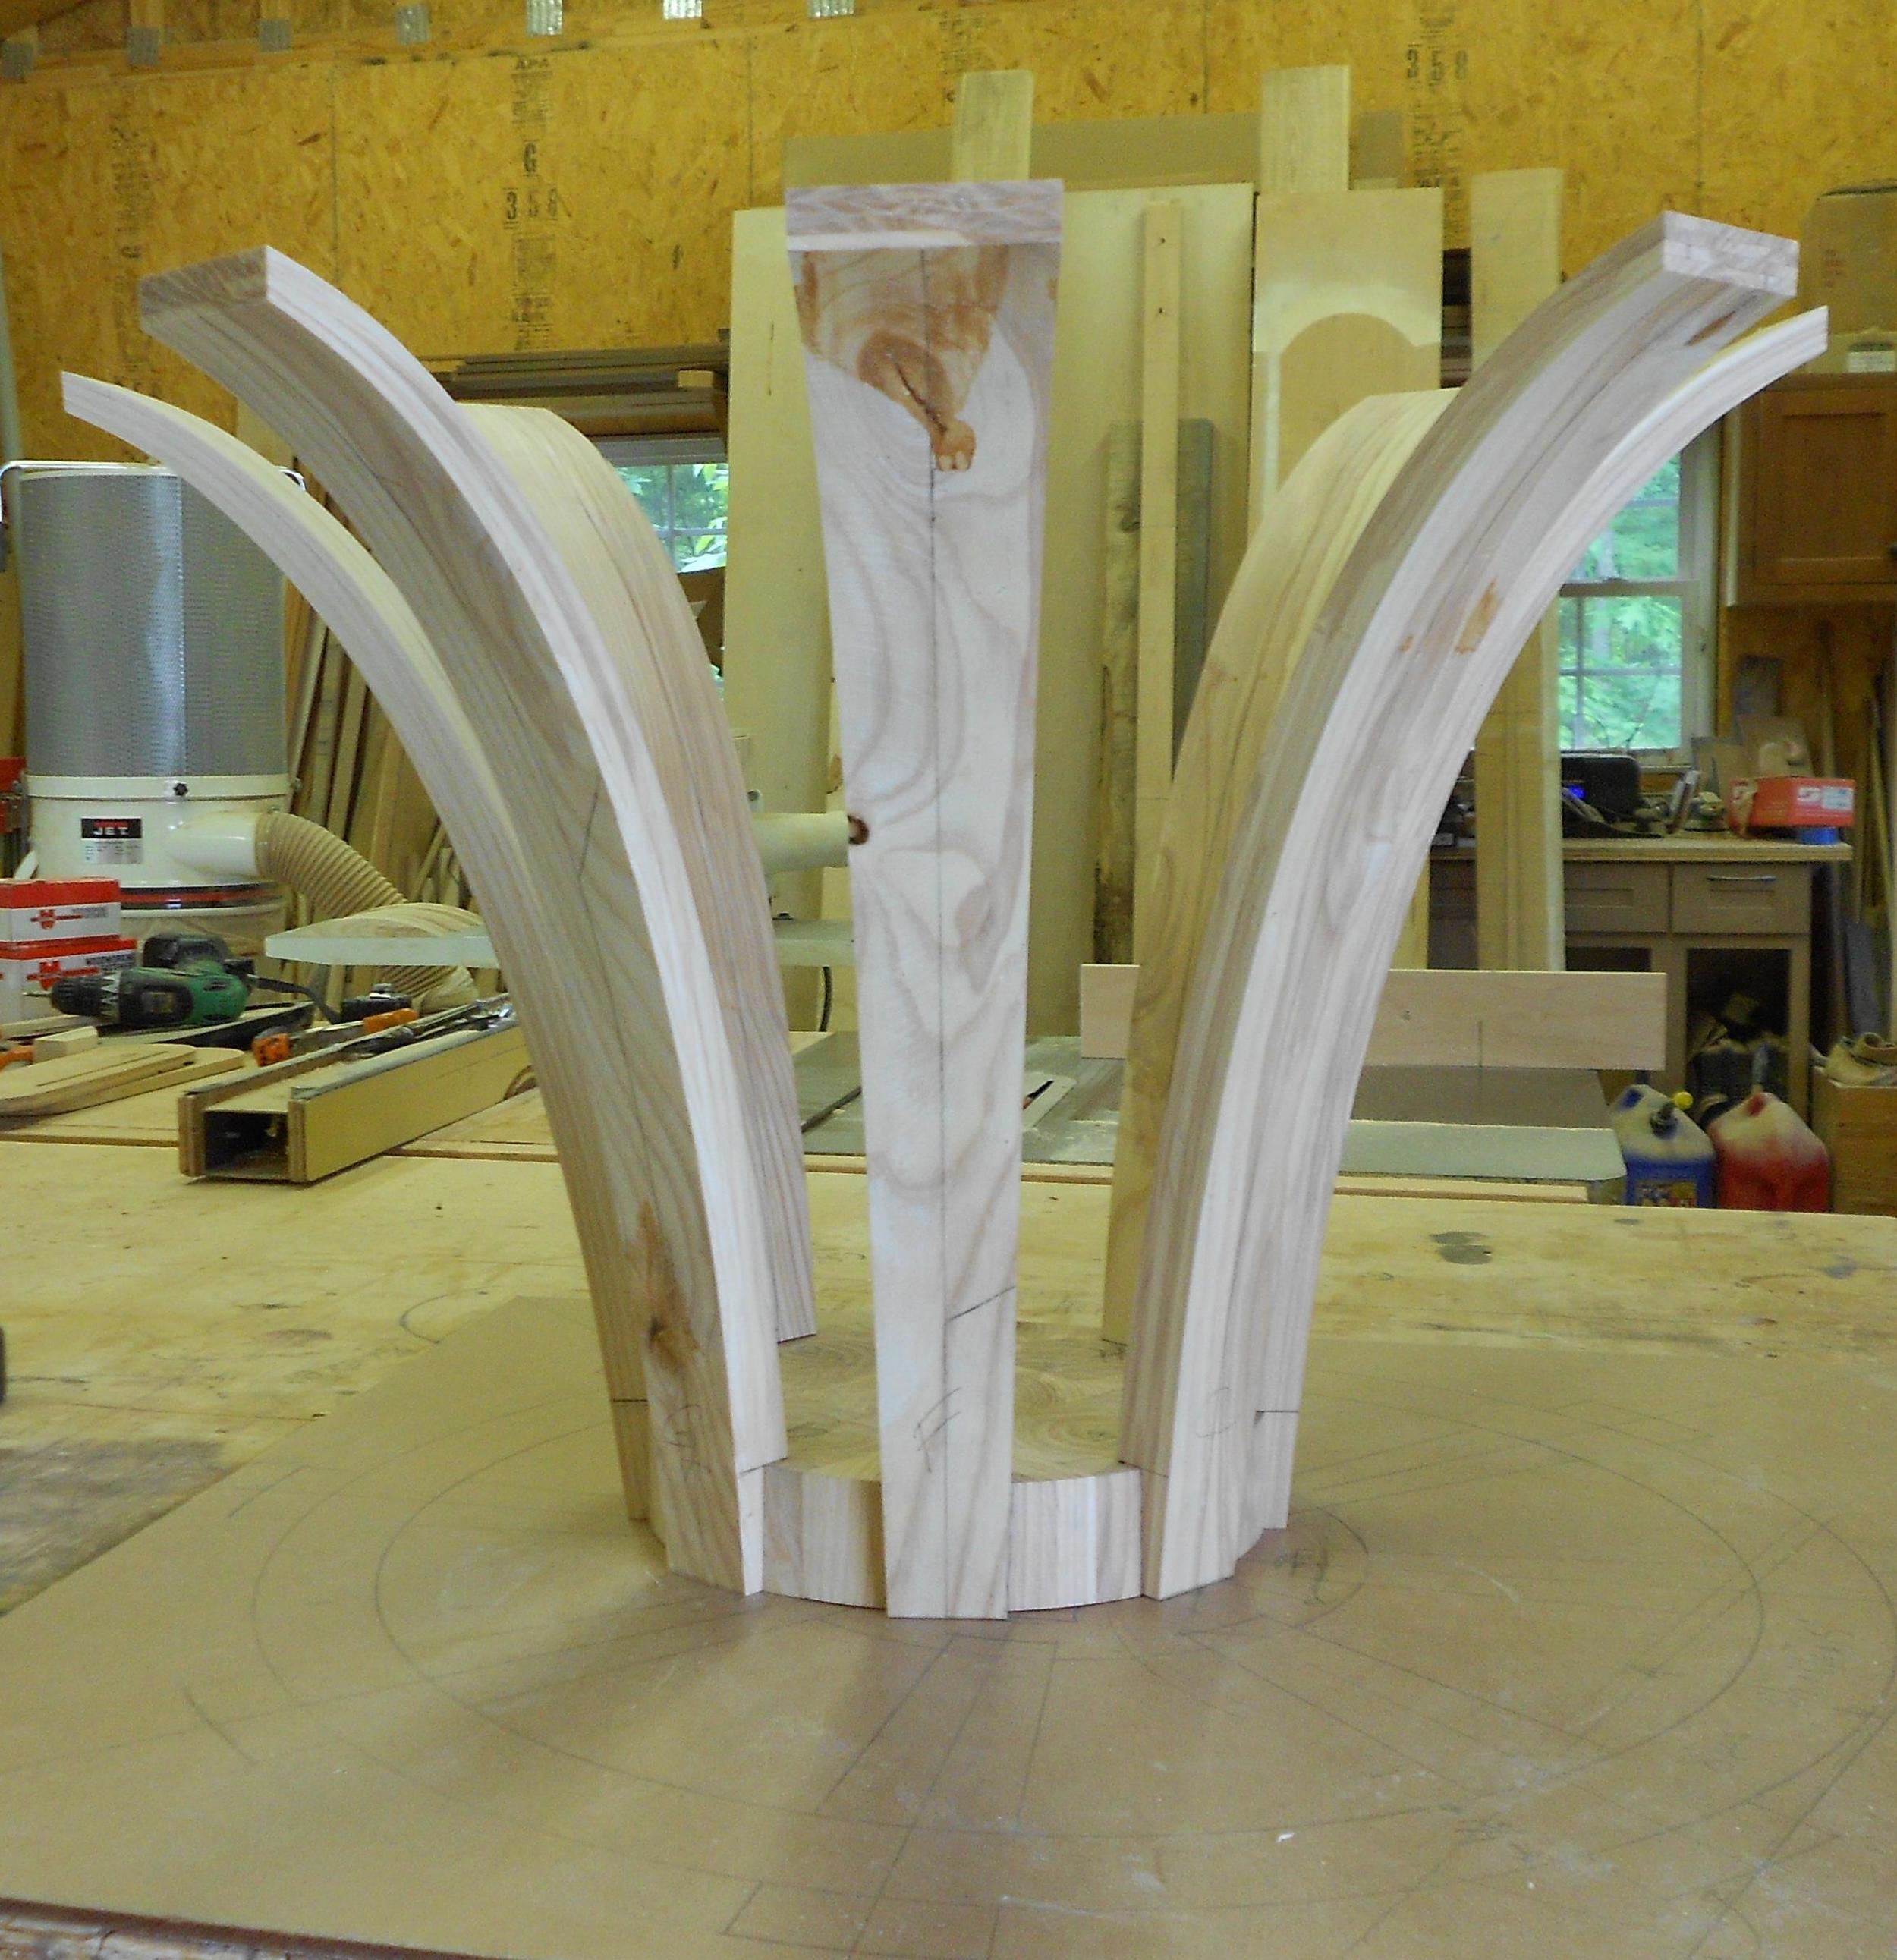 Brockport commission 9 joinery fit and ready to glue.jpg